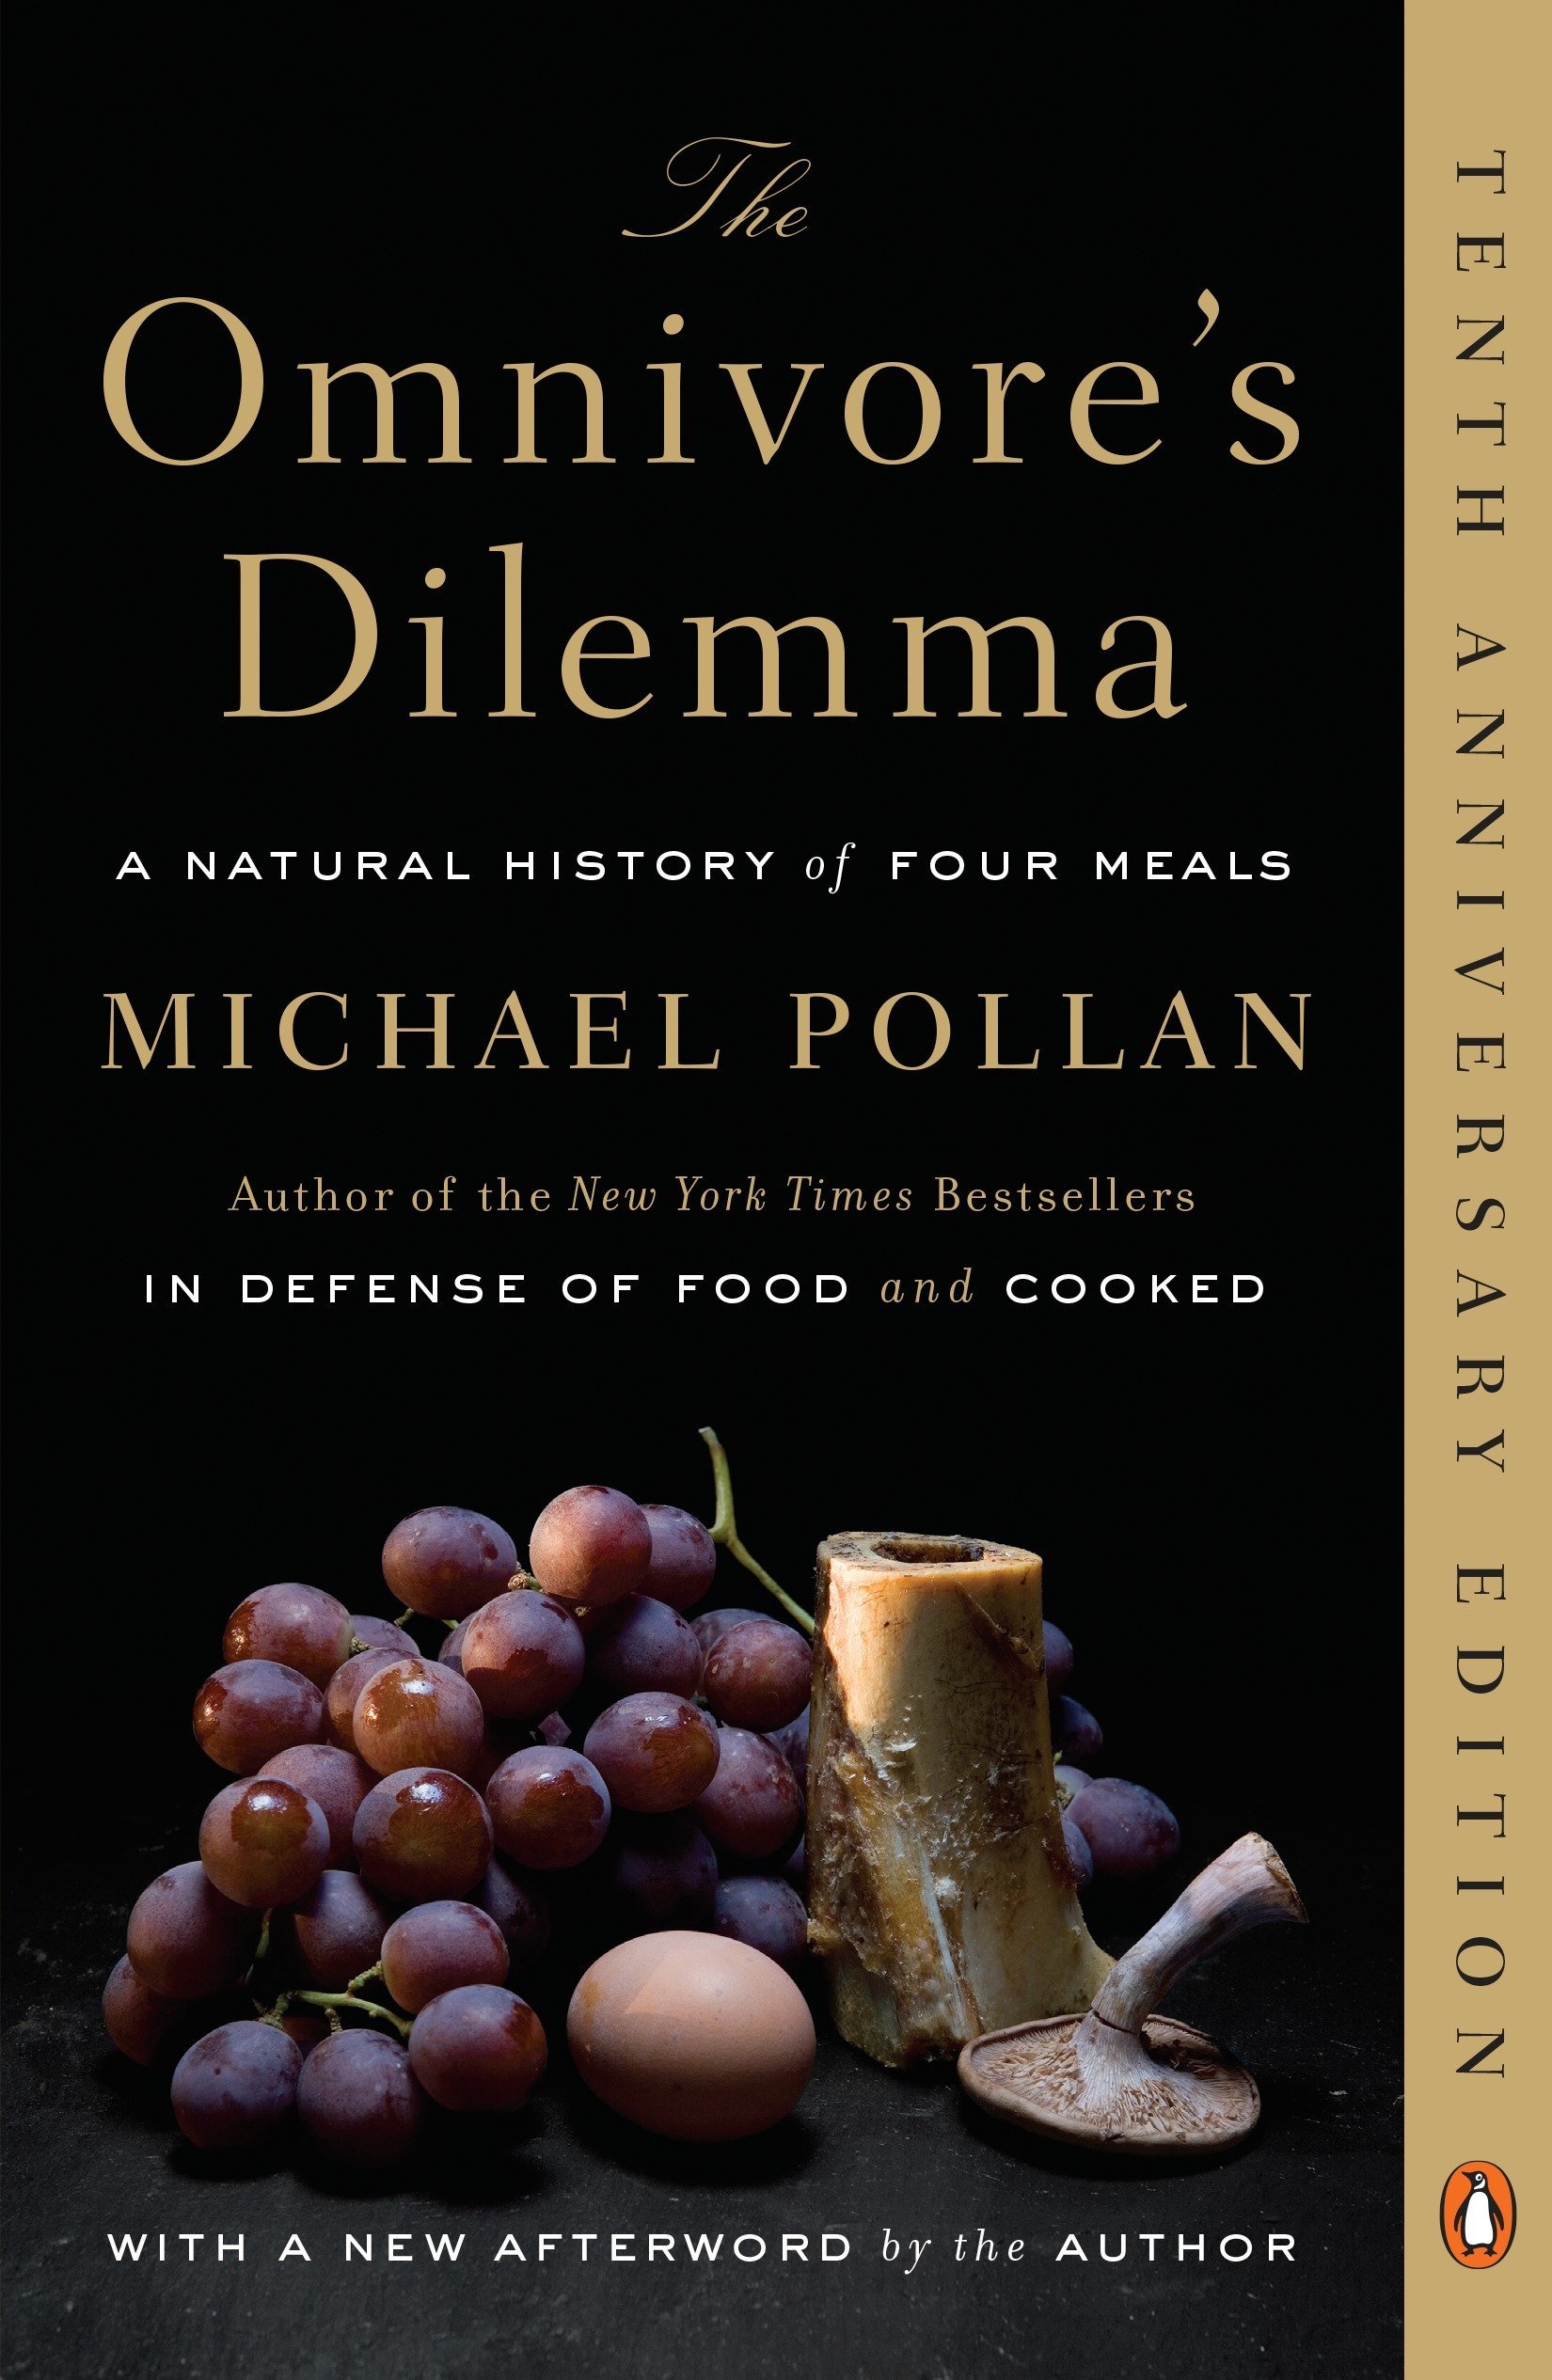 The Omnivore’s Dilemma- a Natural History of Four Meals